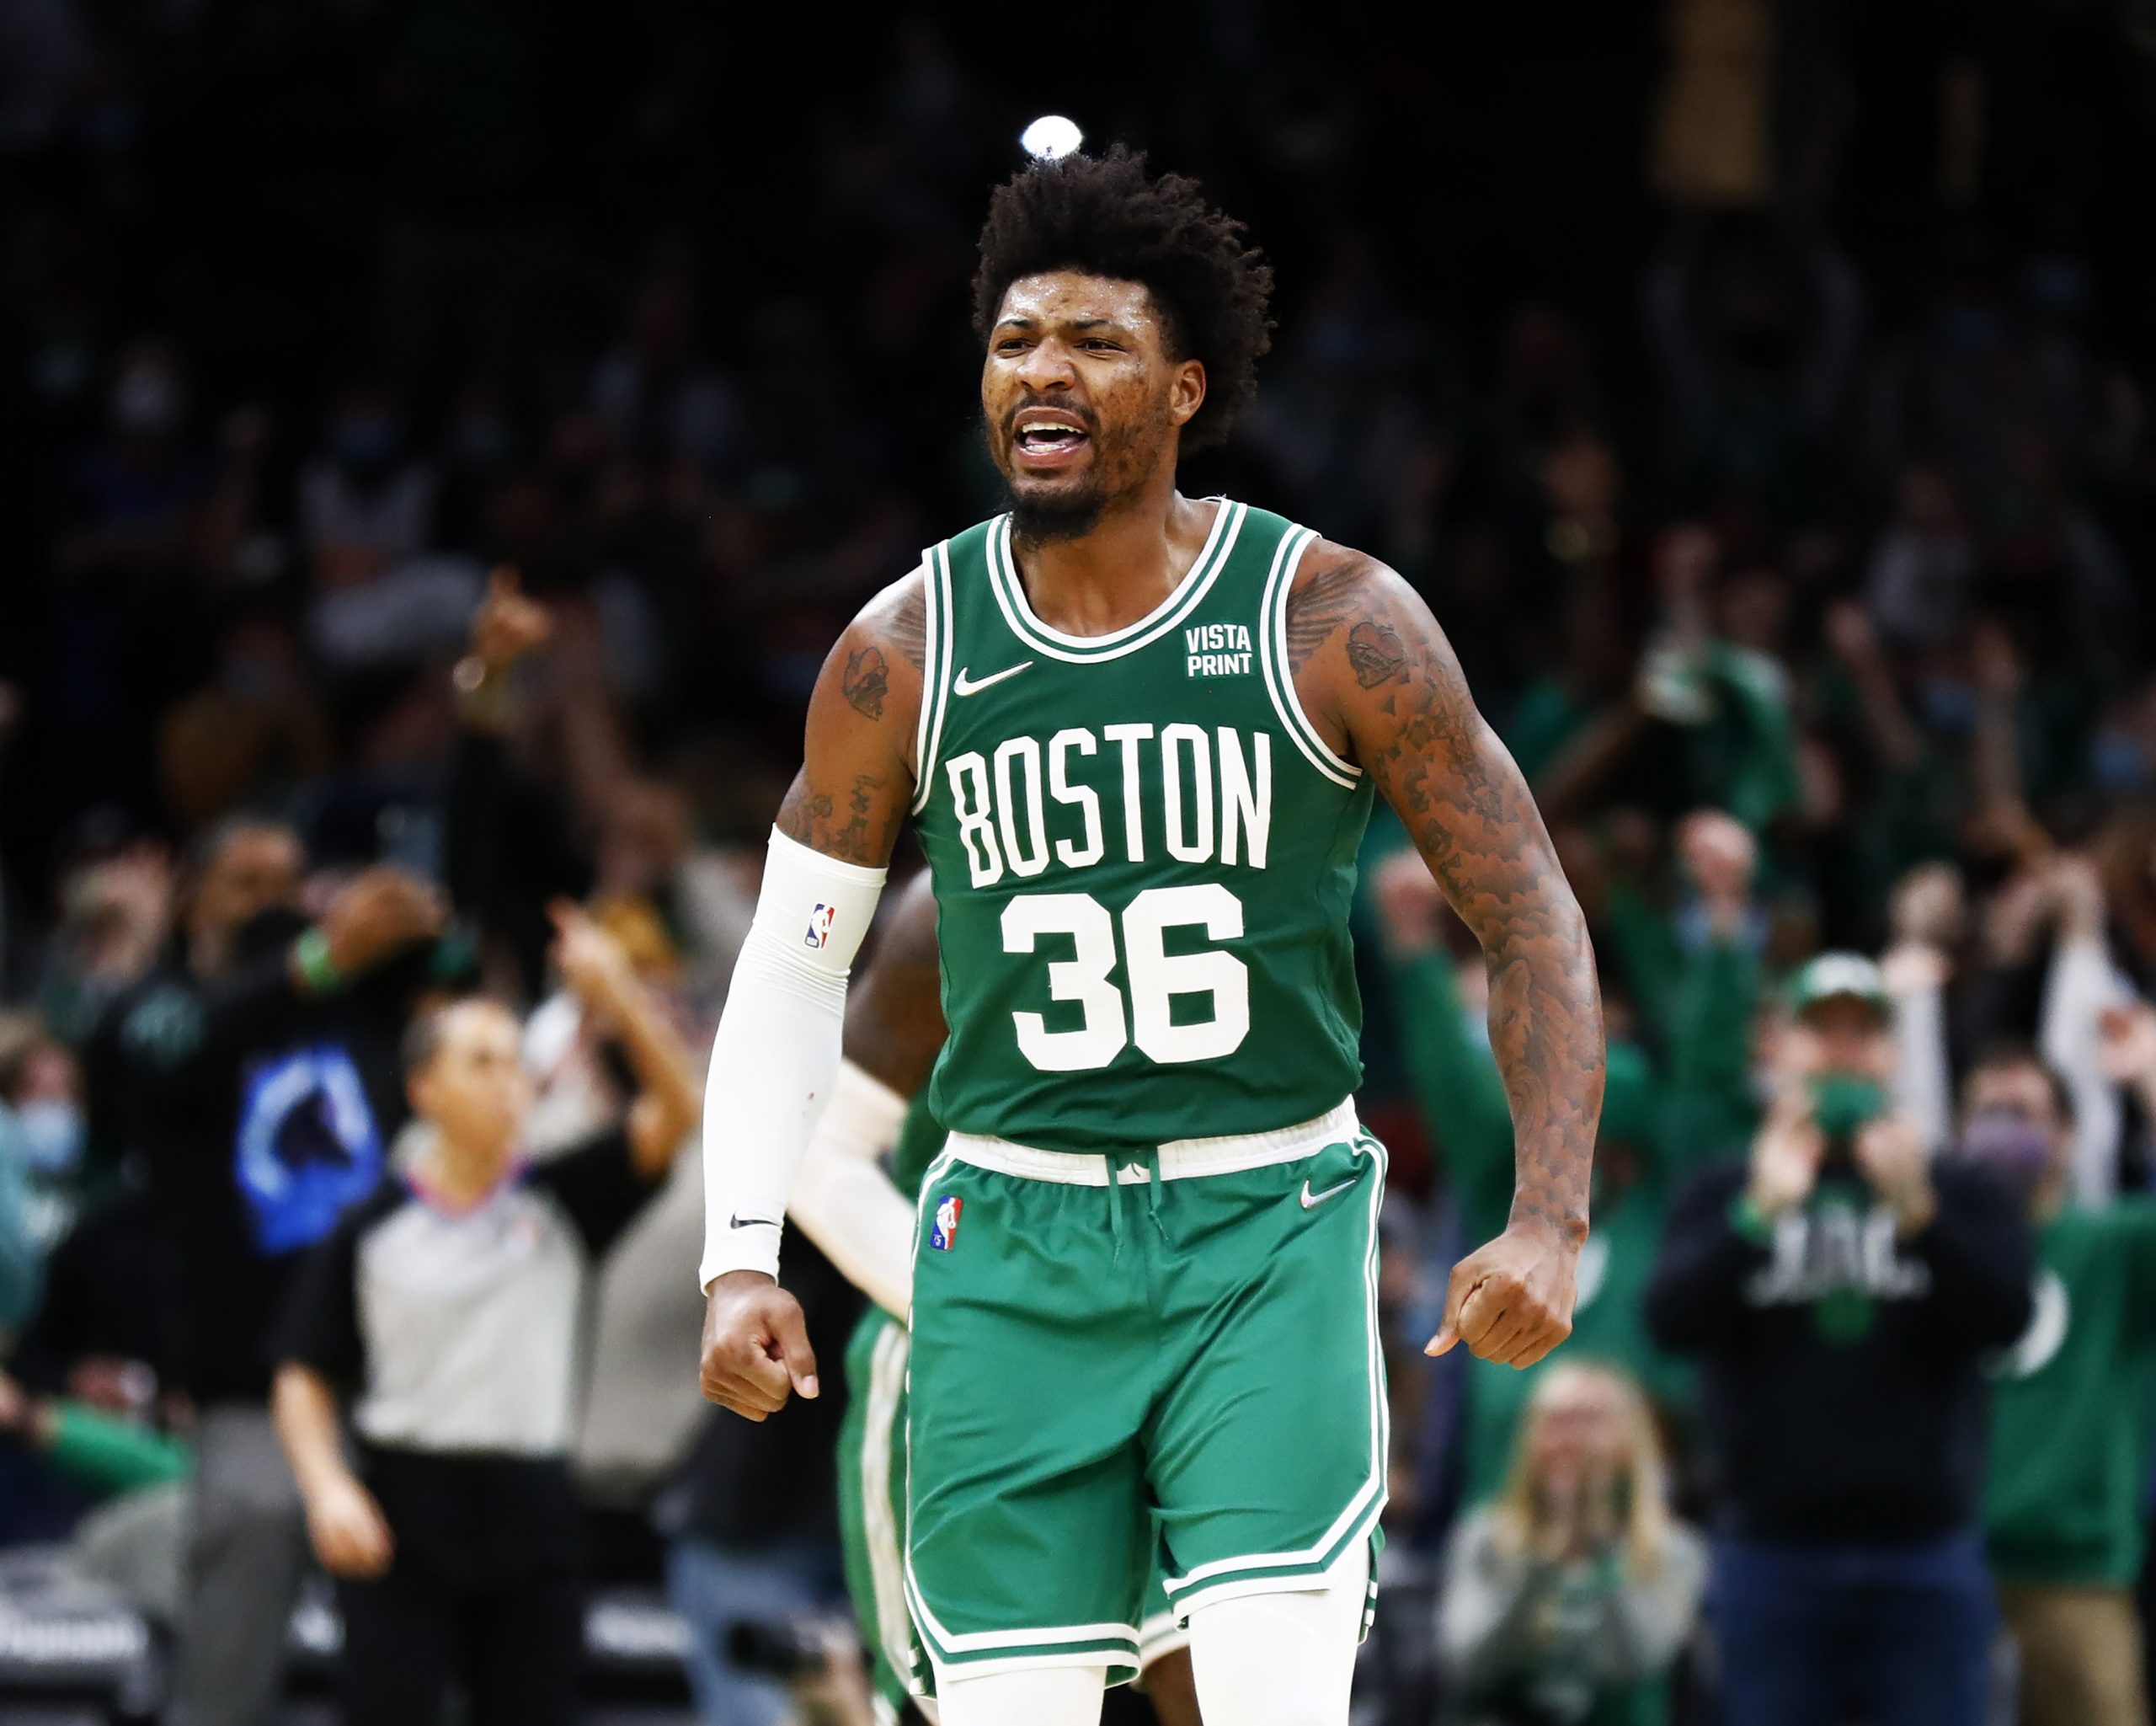 Marcus Smart of the Boston Celtics reacts after scoring during the fourth quarter of the game against the Orlando Magic.